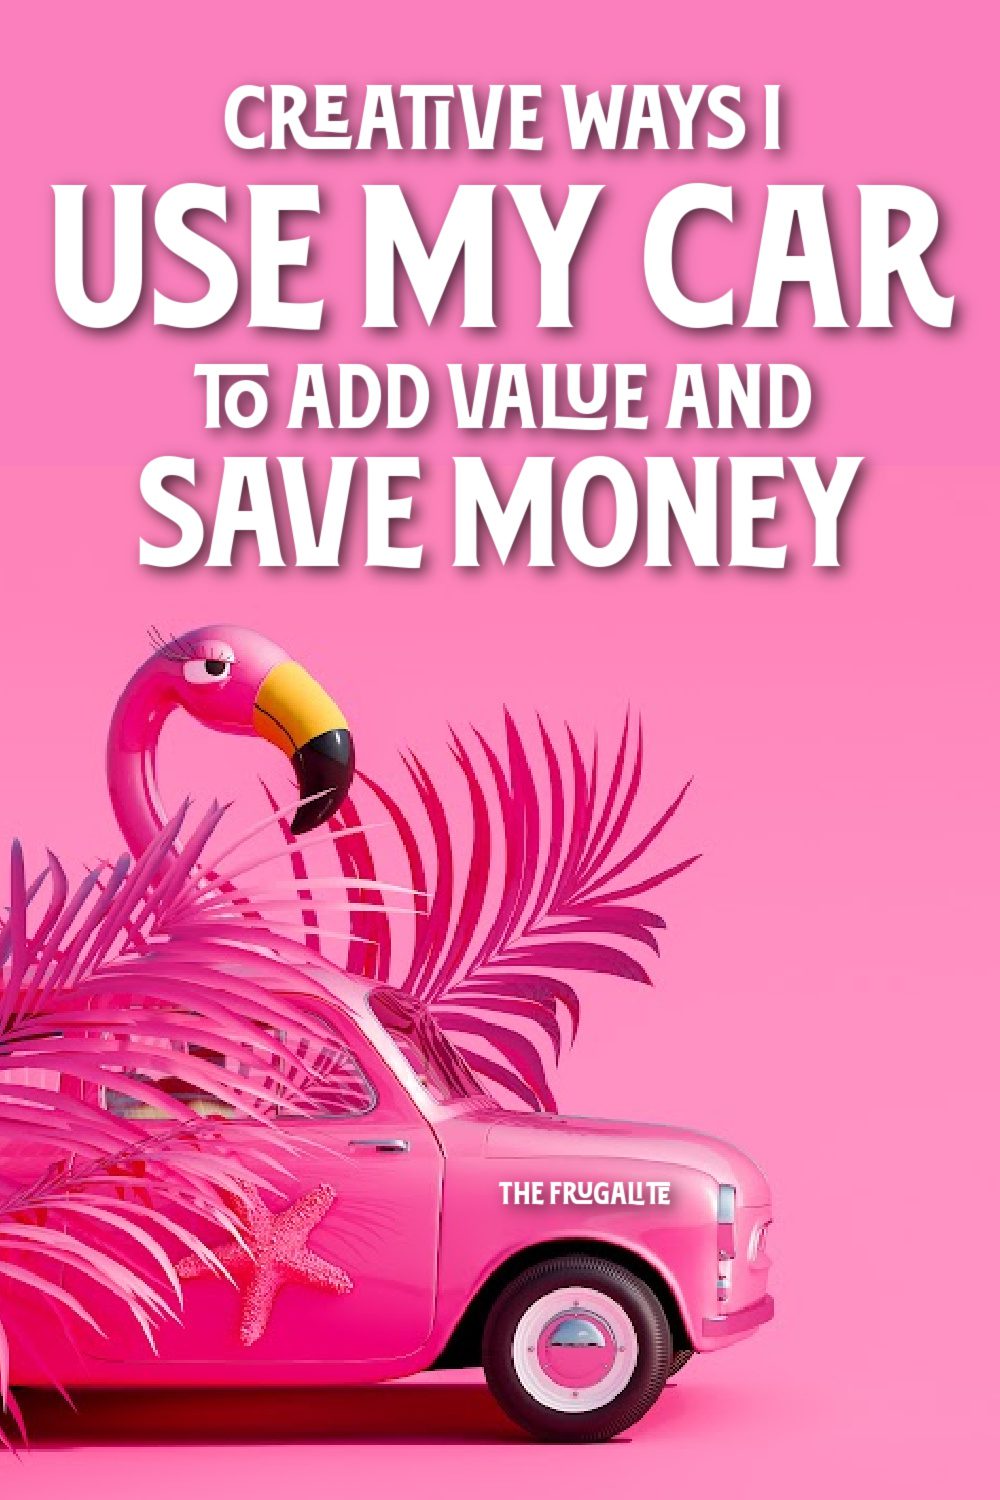 Creative Ways I Use My Car to Add Value and Save Money